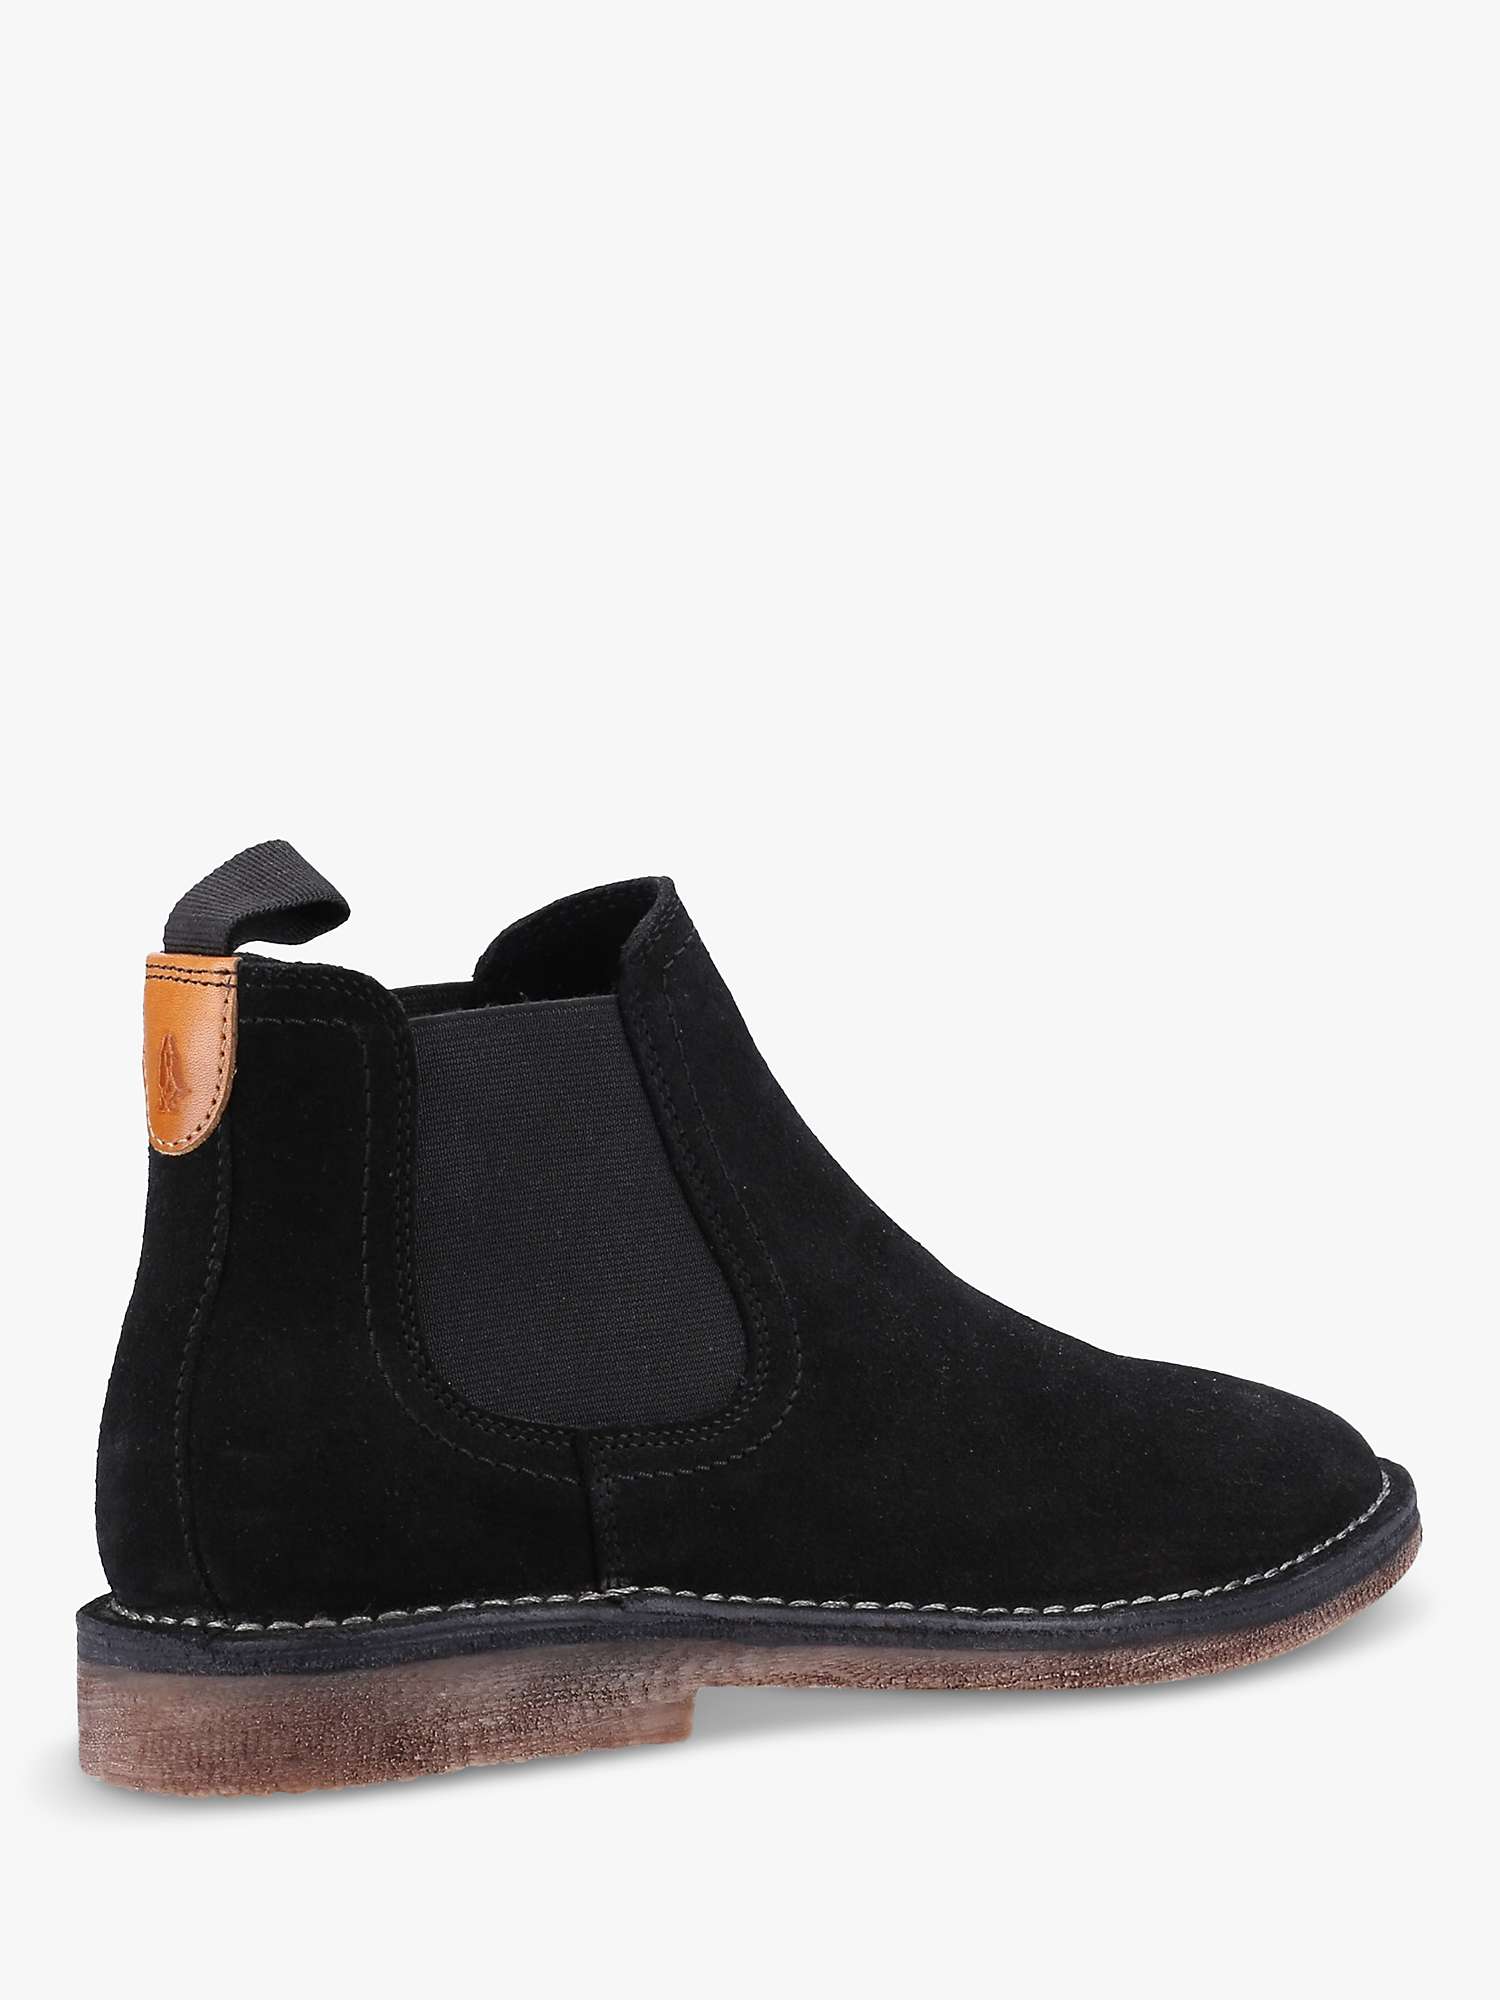 Buy Hush Puppies Shaun Leather Chelsea Boots Online at johnlewis.com